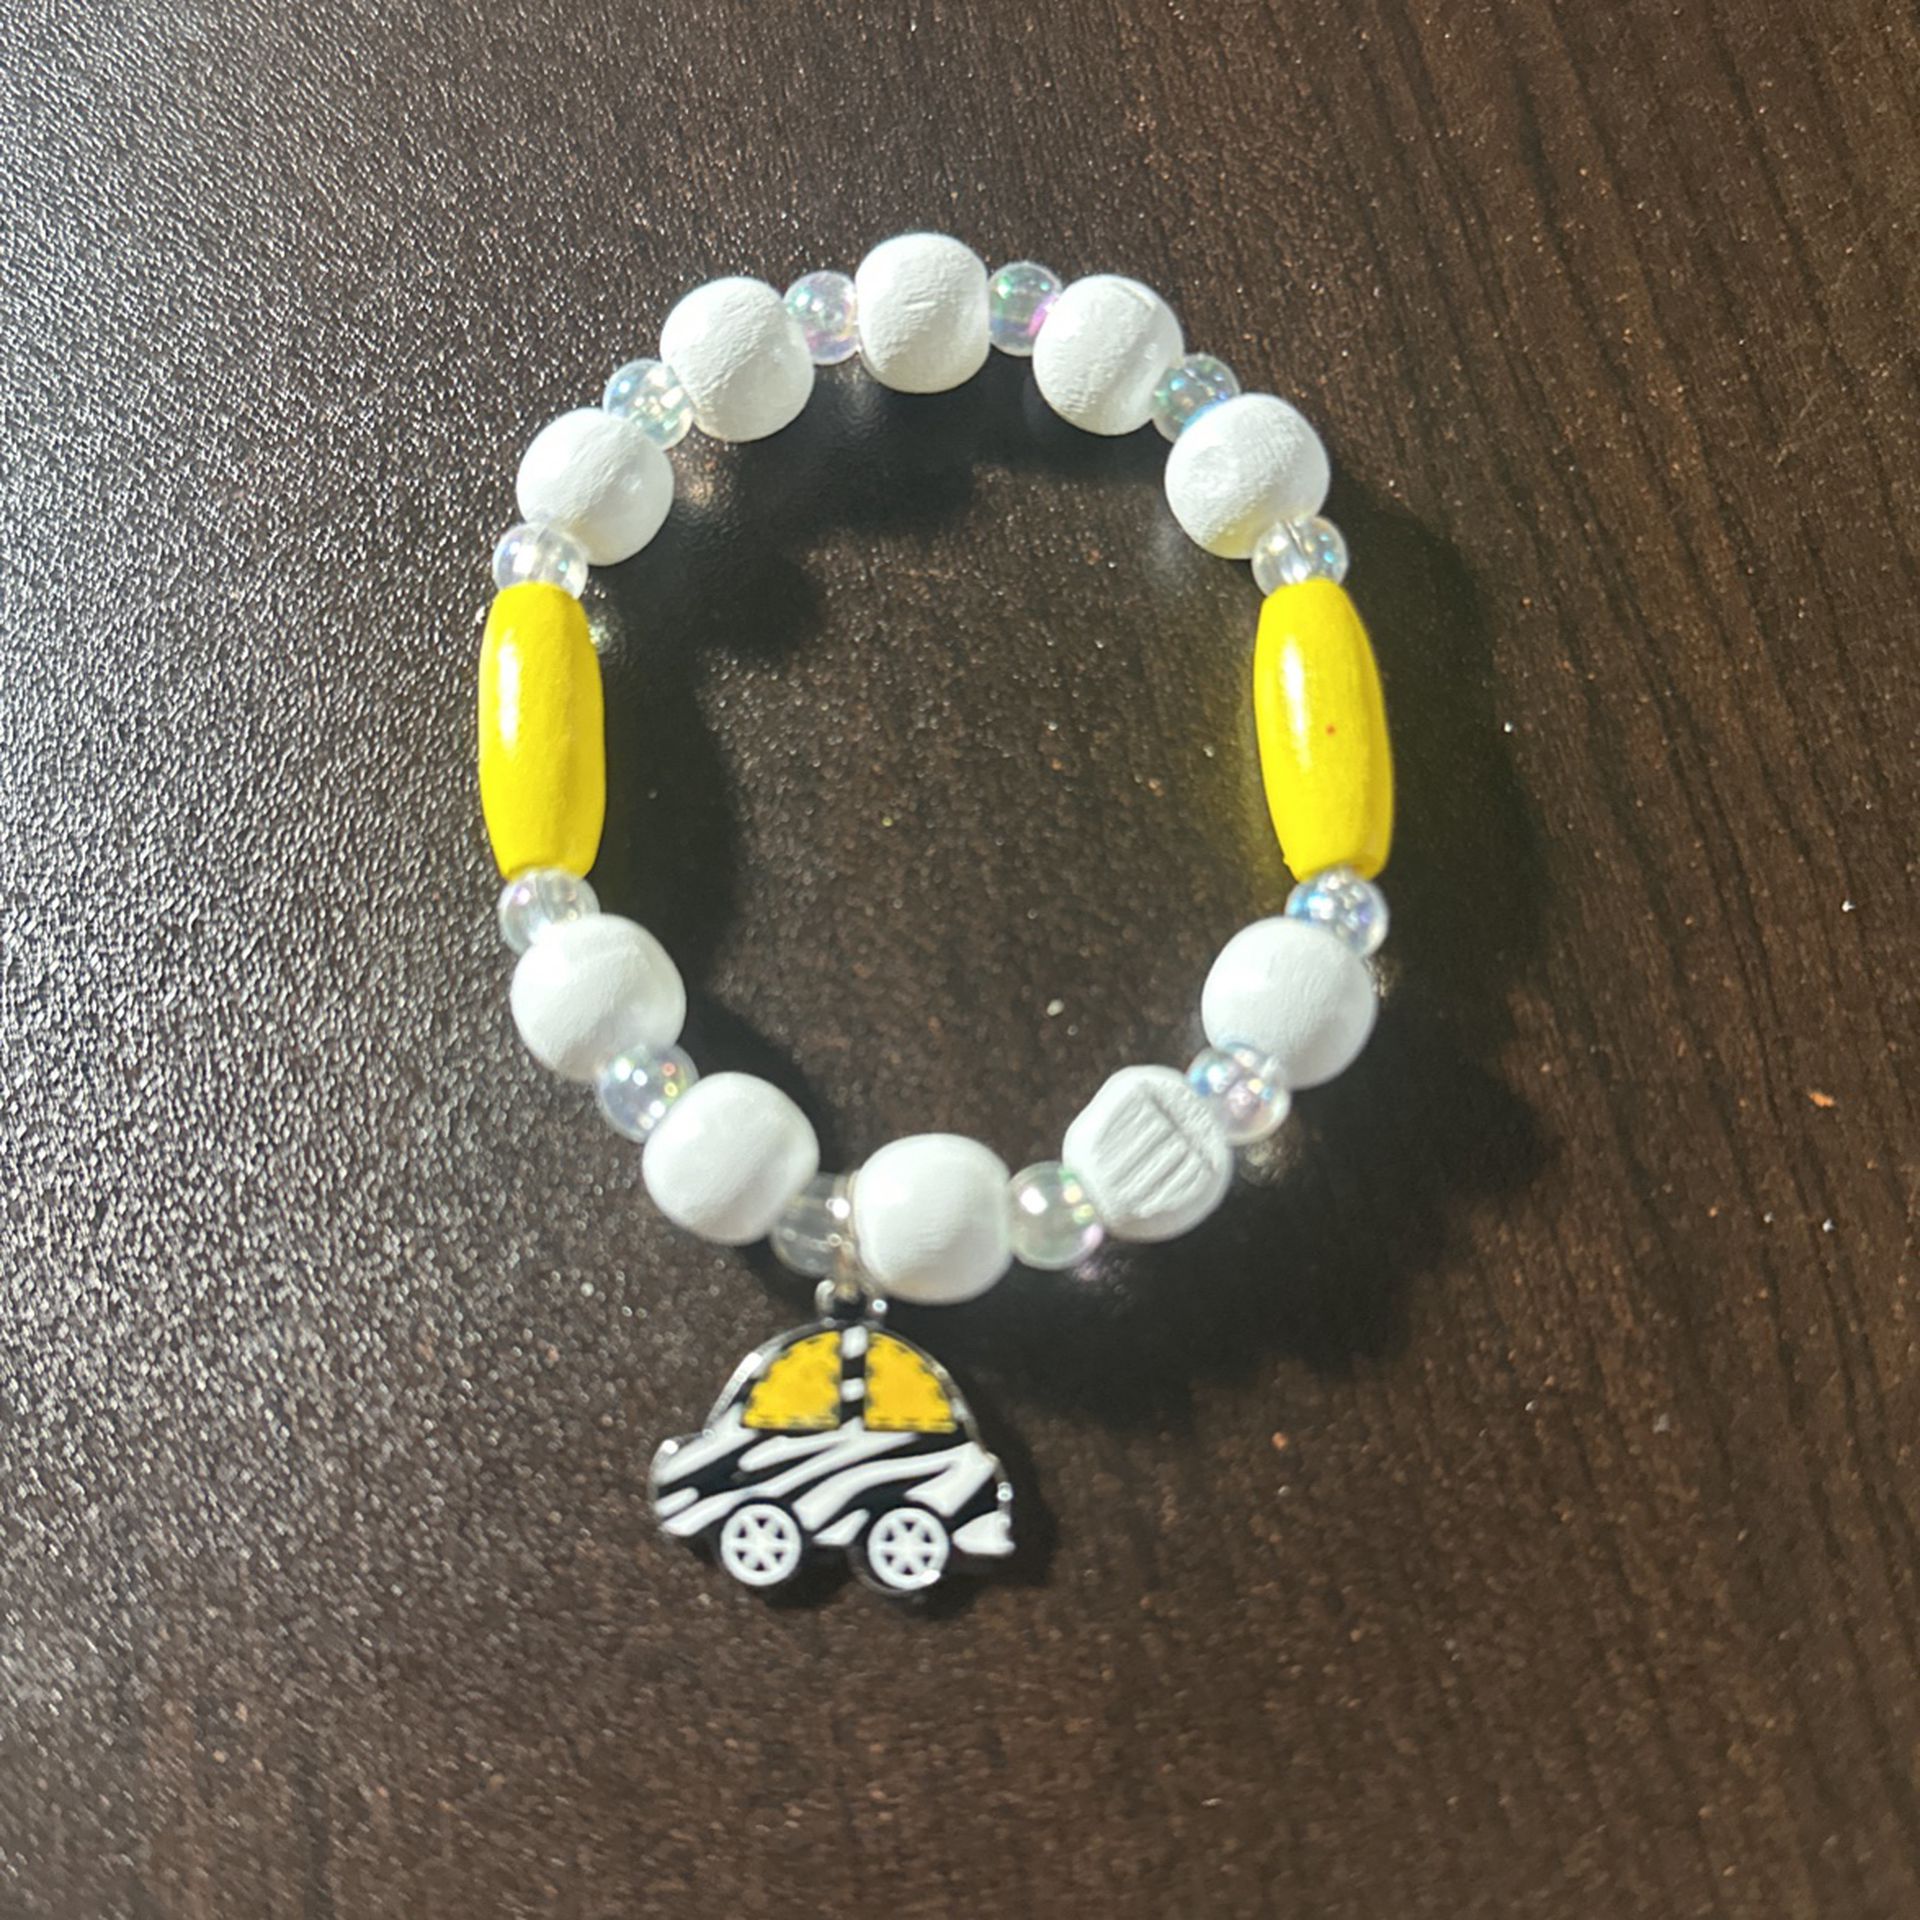 White, Yellow, And Clear Beads Bracelet With A Black White And Yellow Car Charm